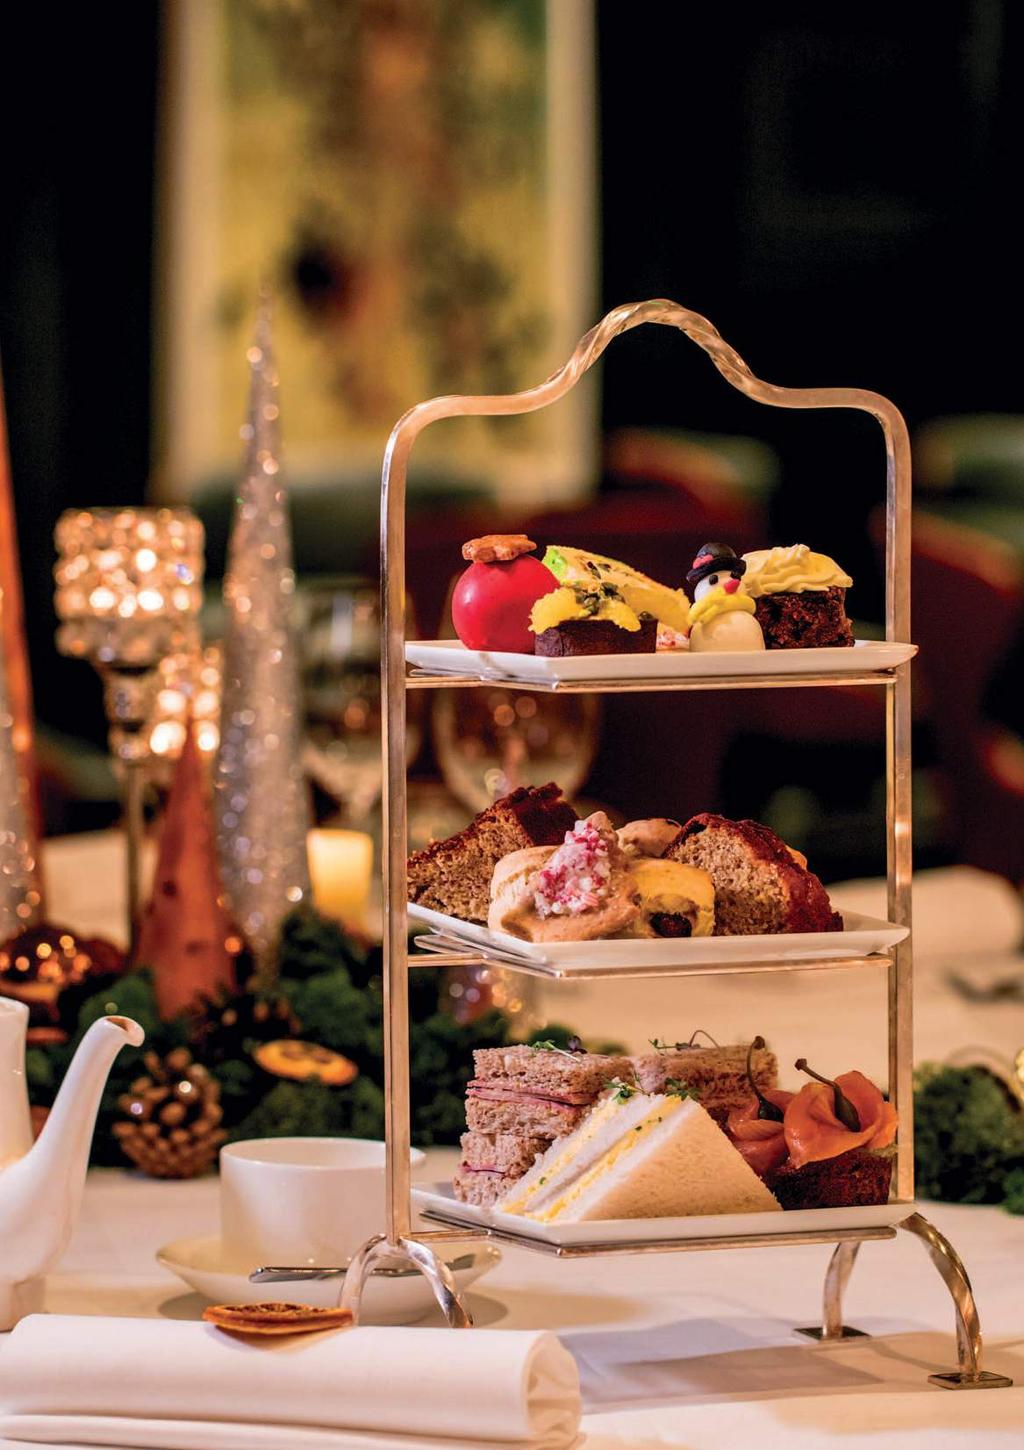 Contact our Christmas team Time for a treat? Then it's time for tea Shopping and wrapping done? Take a well-deserved break, our festive afternoon teas are the perfect remedy.